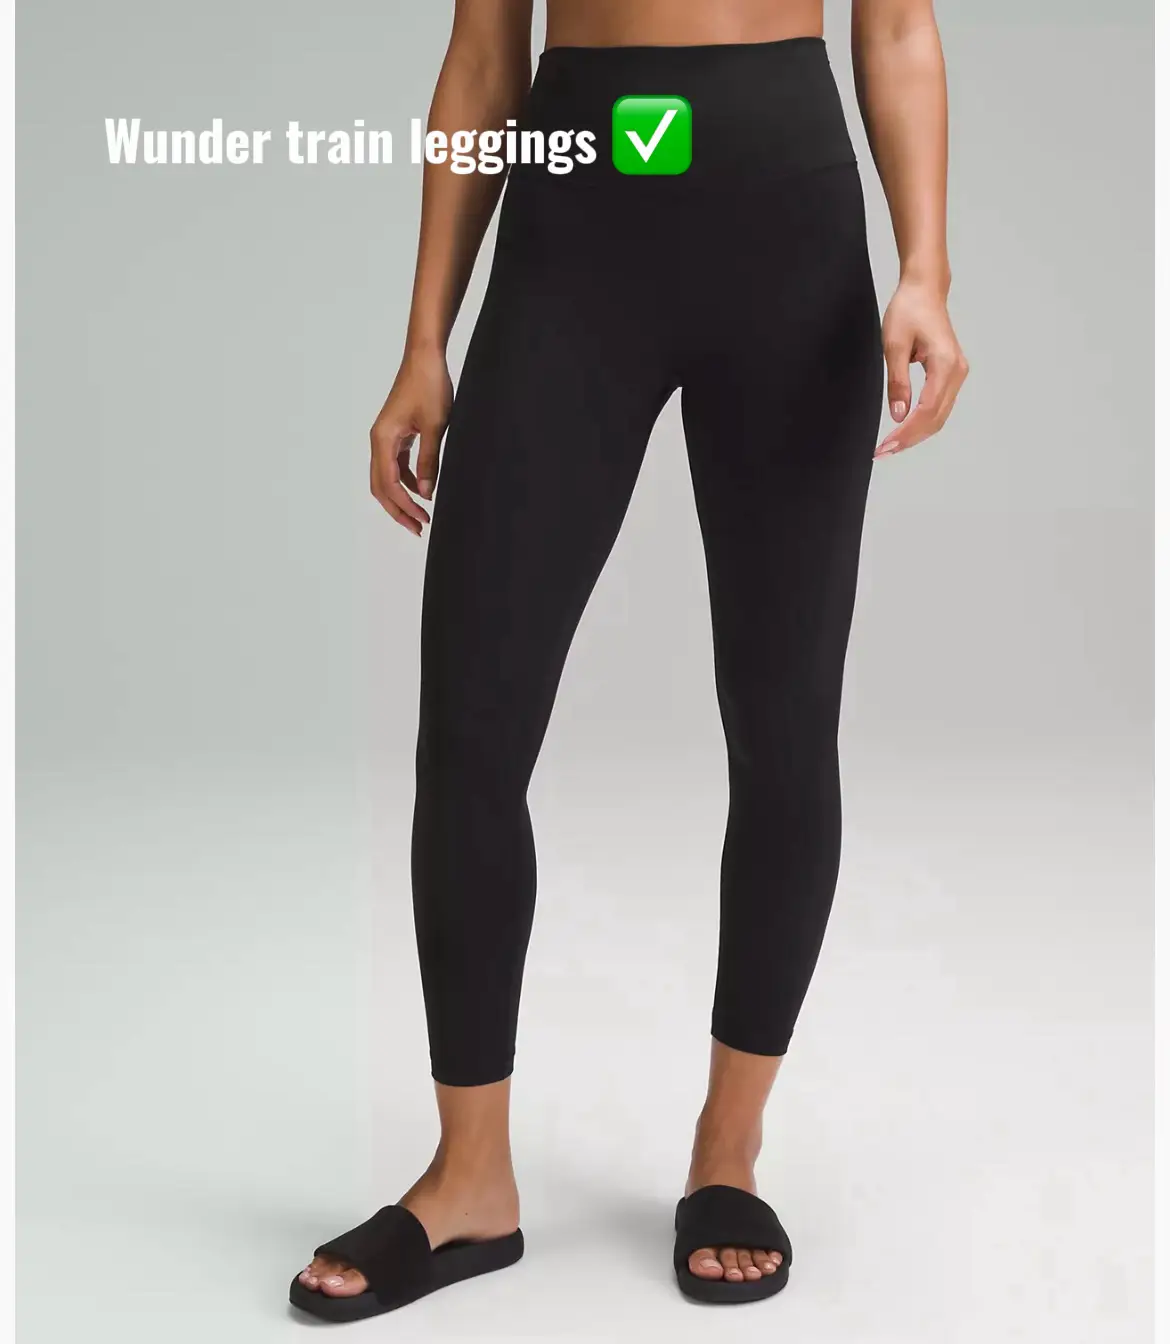 Joined the Wunder Train 🚂😂 Fit Pics wearing size 4 Black, 23